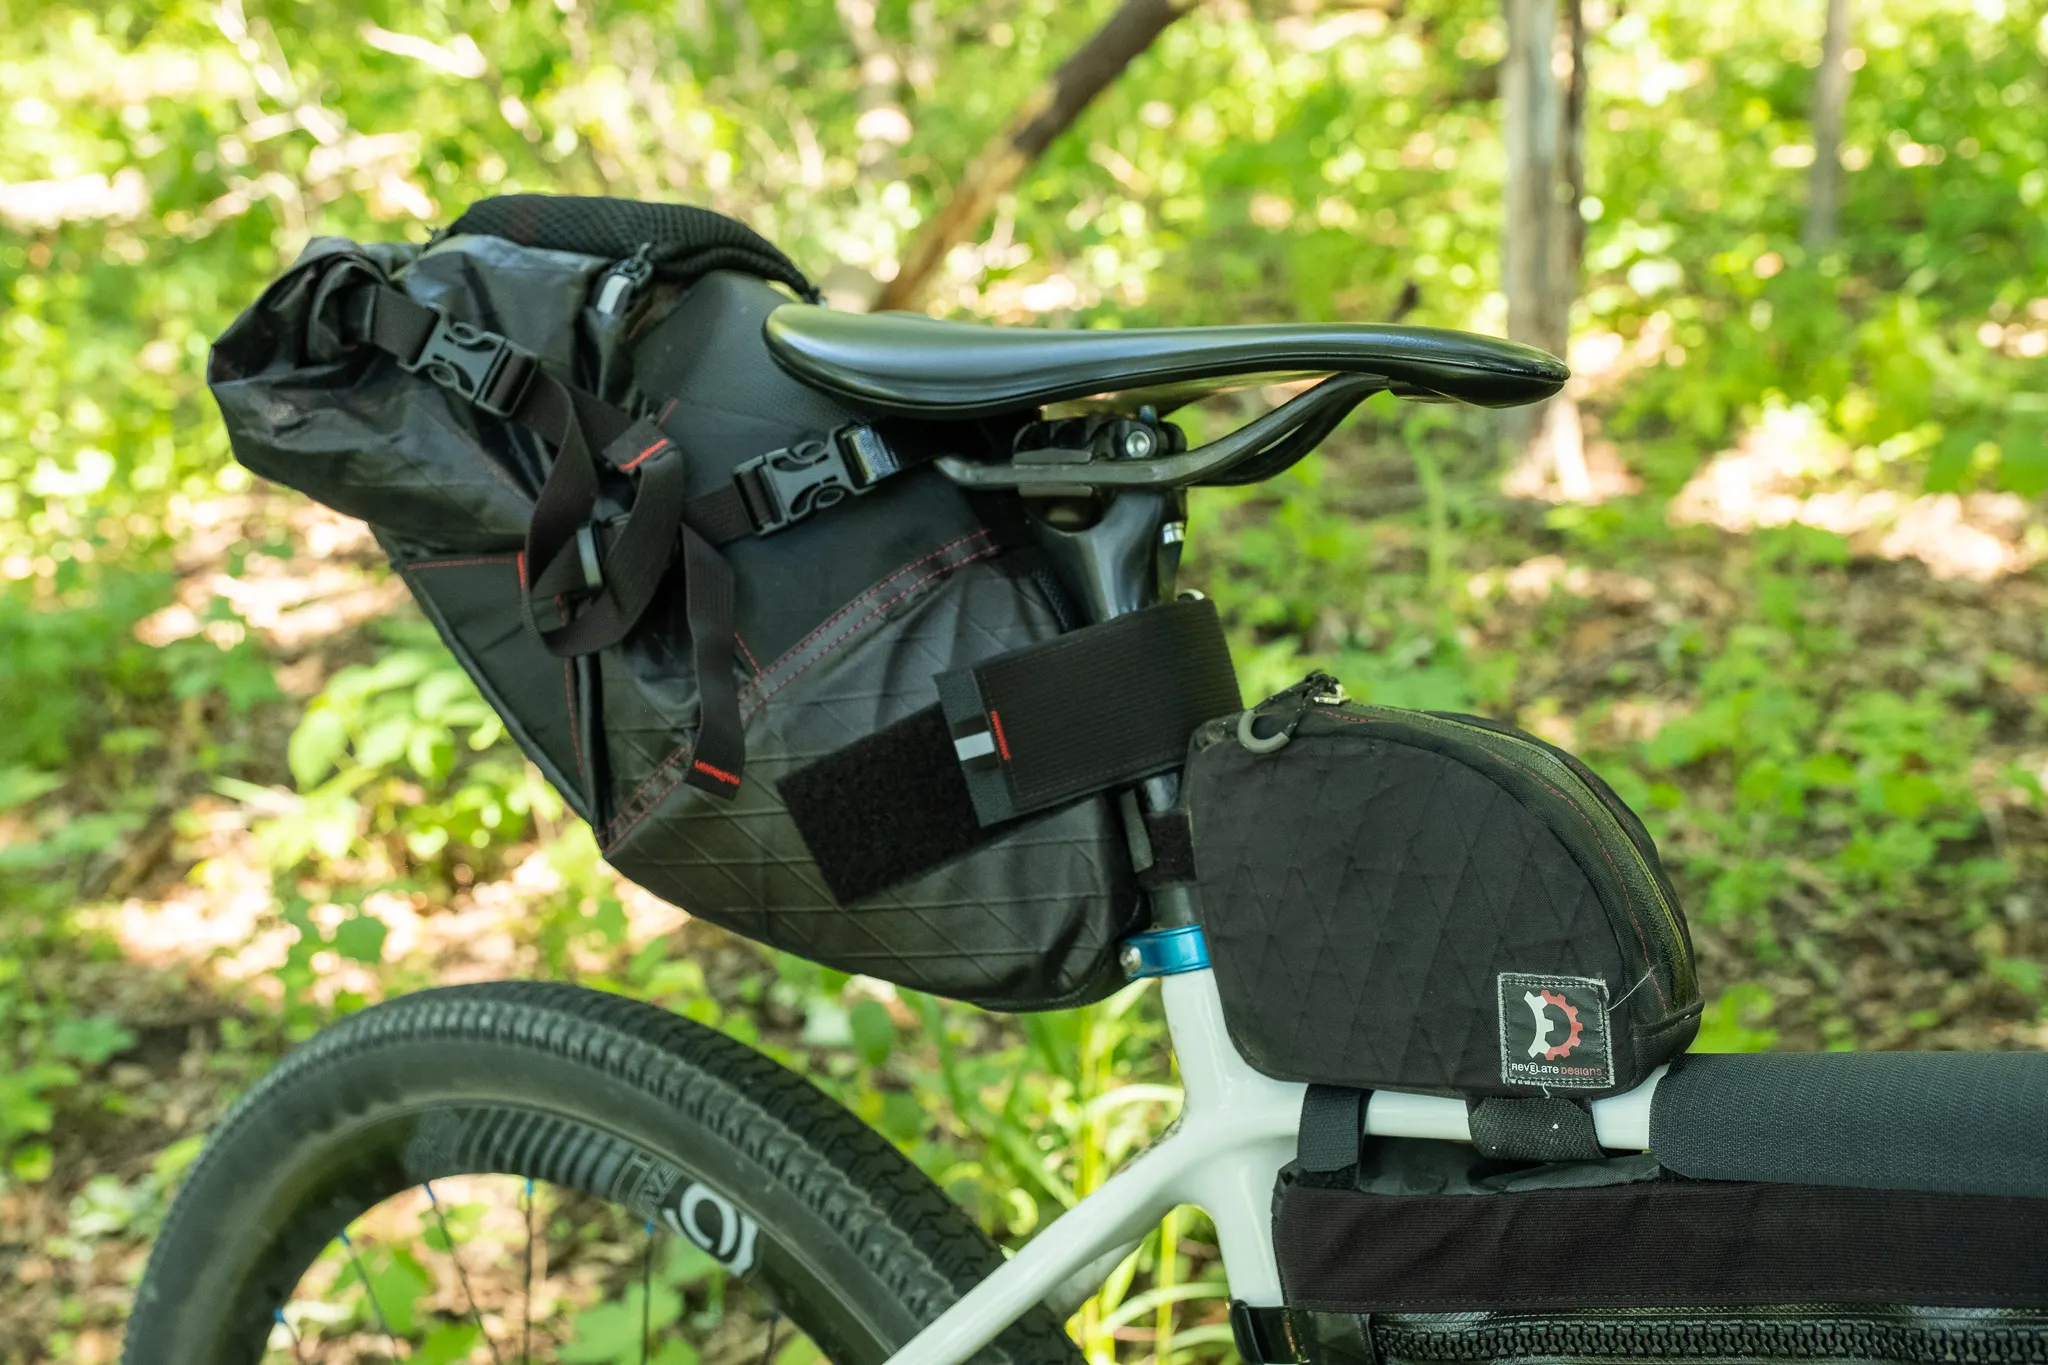 A Waheela C with a full bikepacking setup in a lush forest. The bike has a seat bag, a top tube bag, and a frame bag.